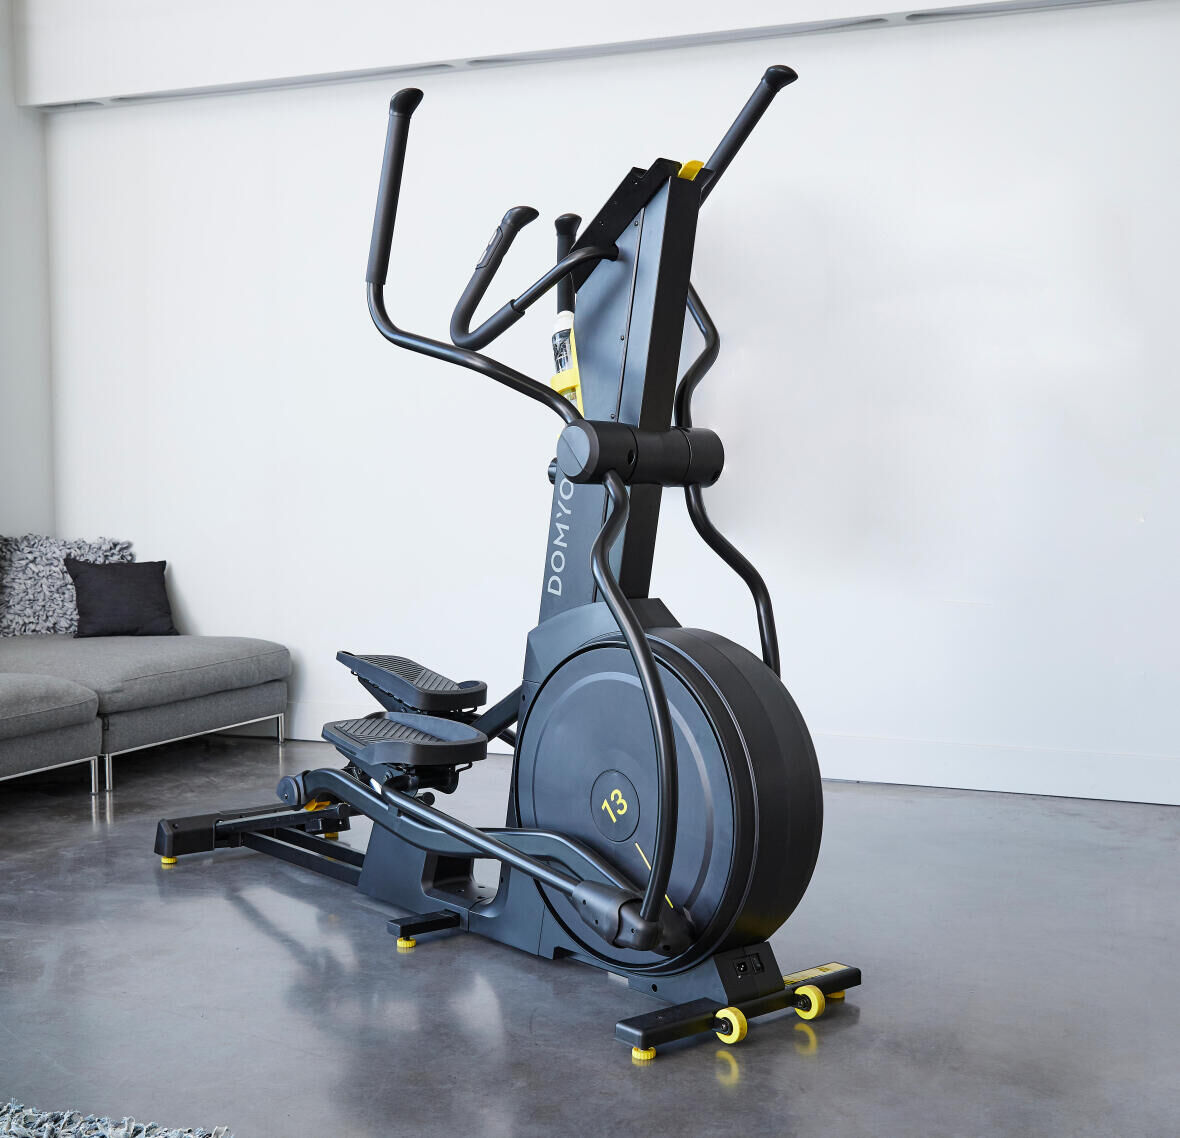 CROSS TRAINER FLAGSHIP PRODUCT